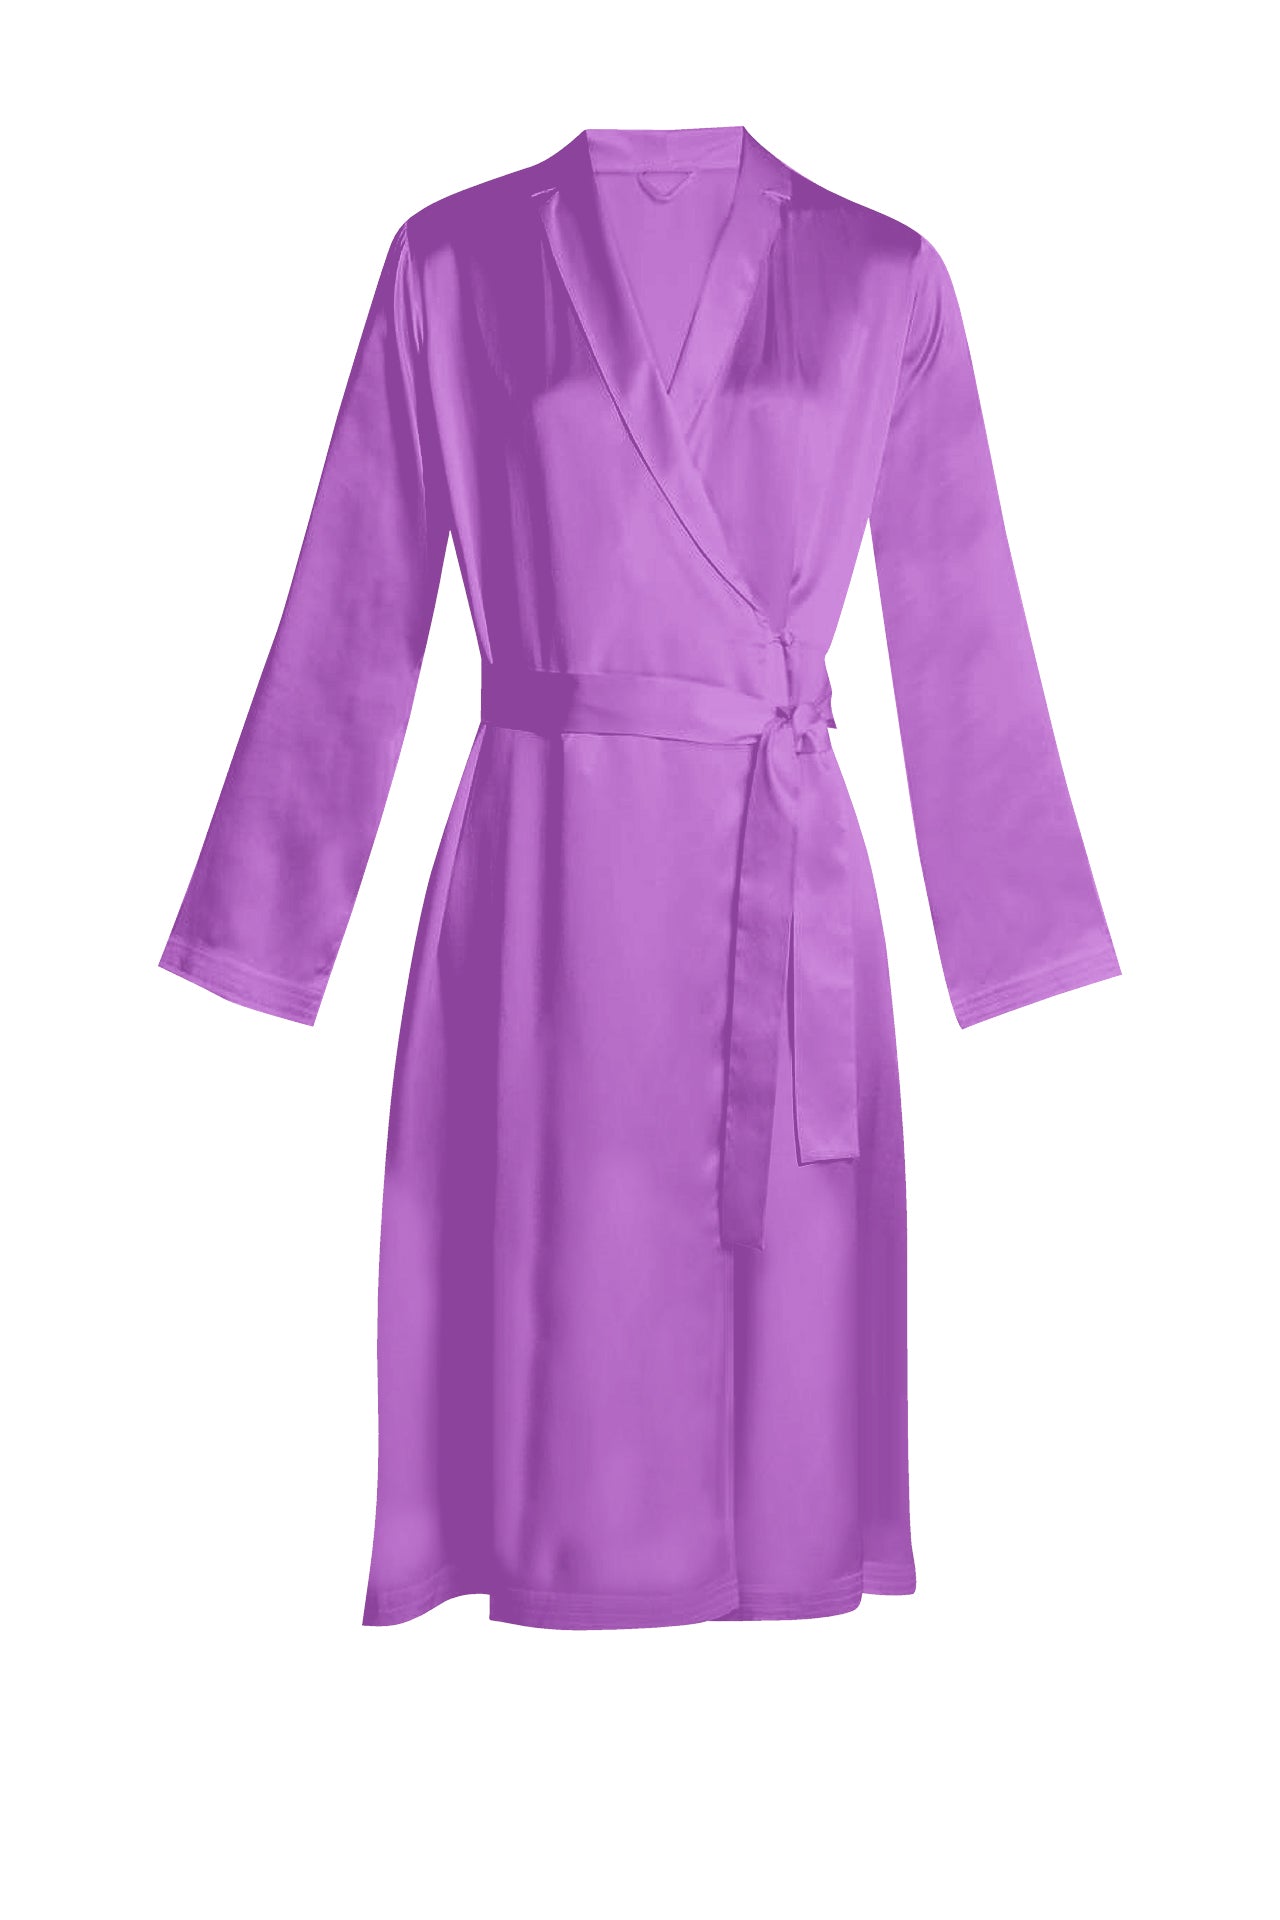 Midi Length Wrap Dress Made with Vegan Silk in African Violet